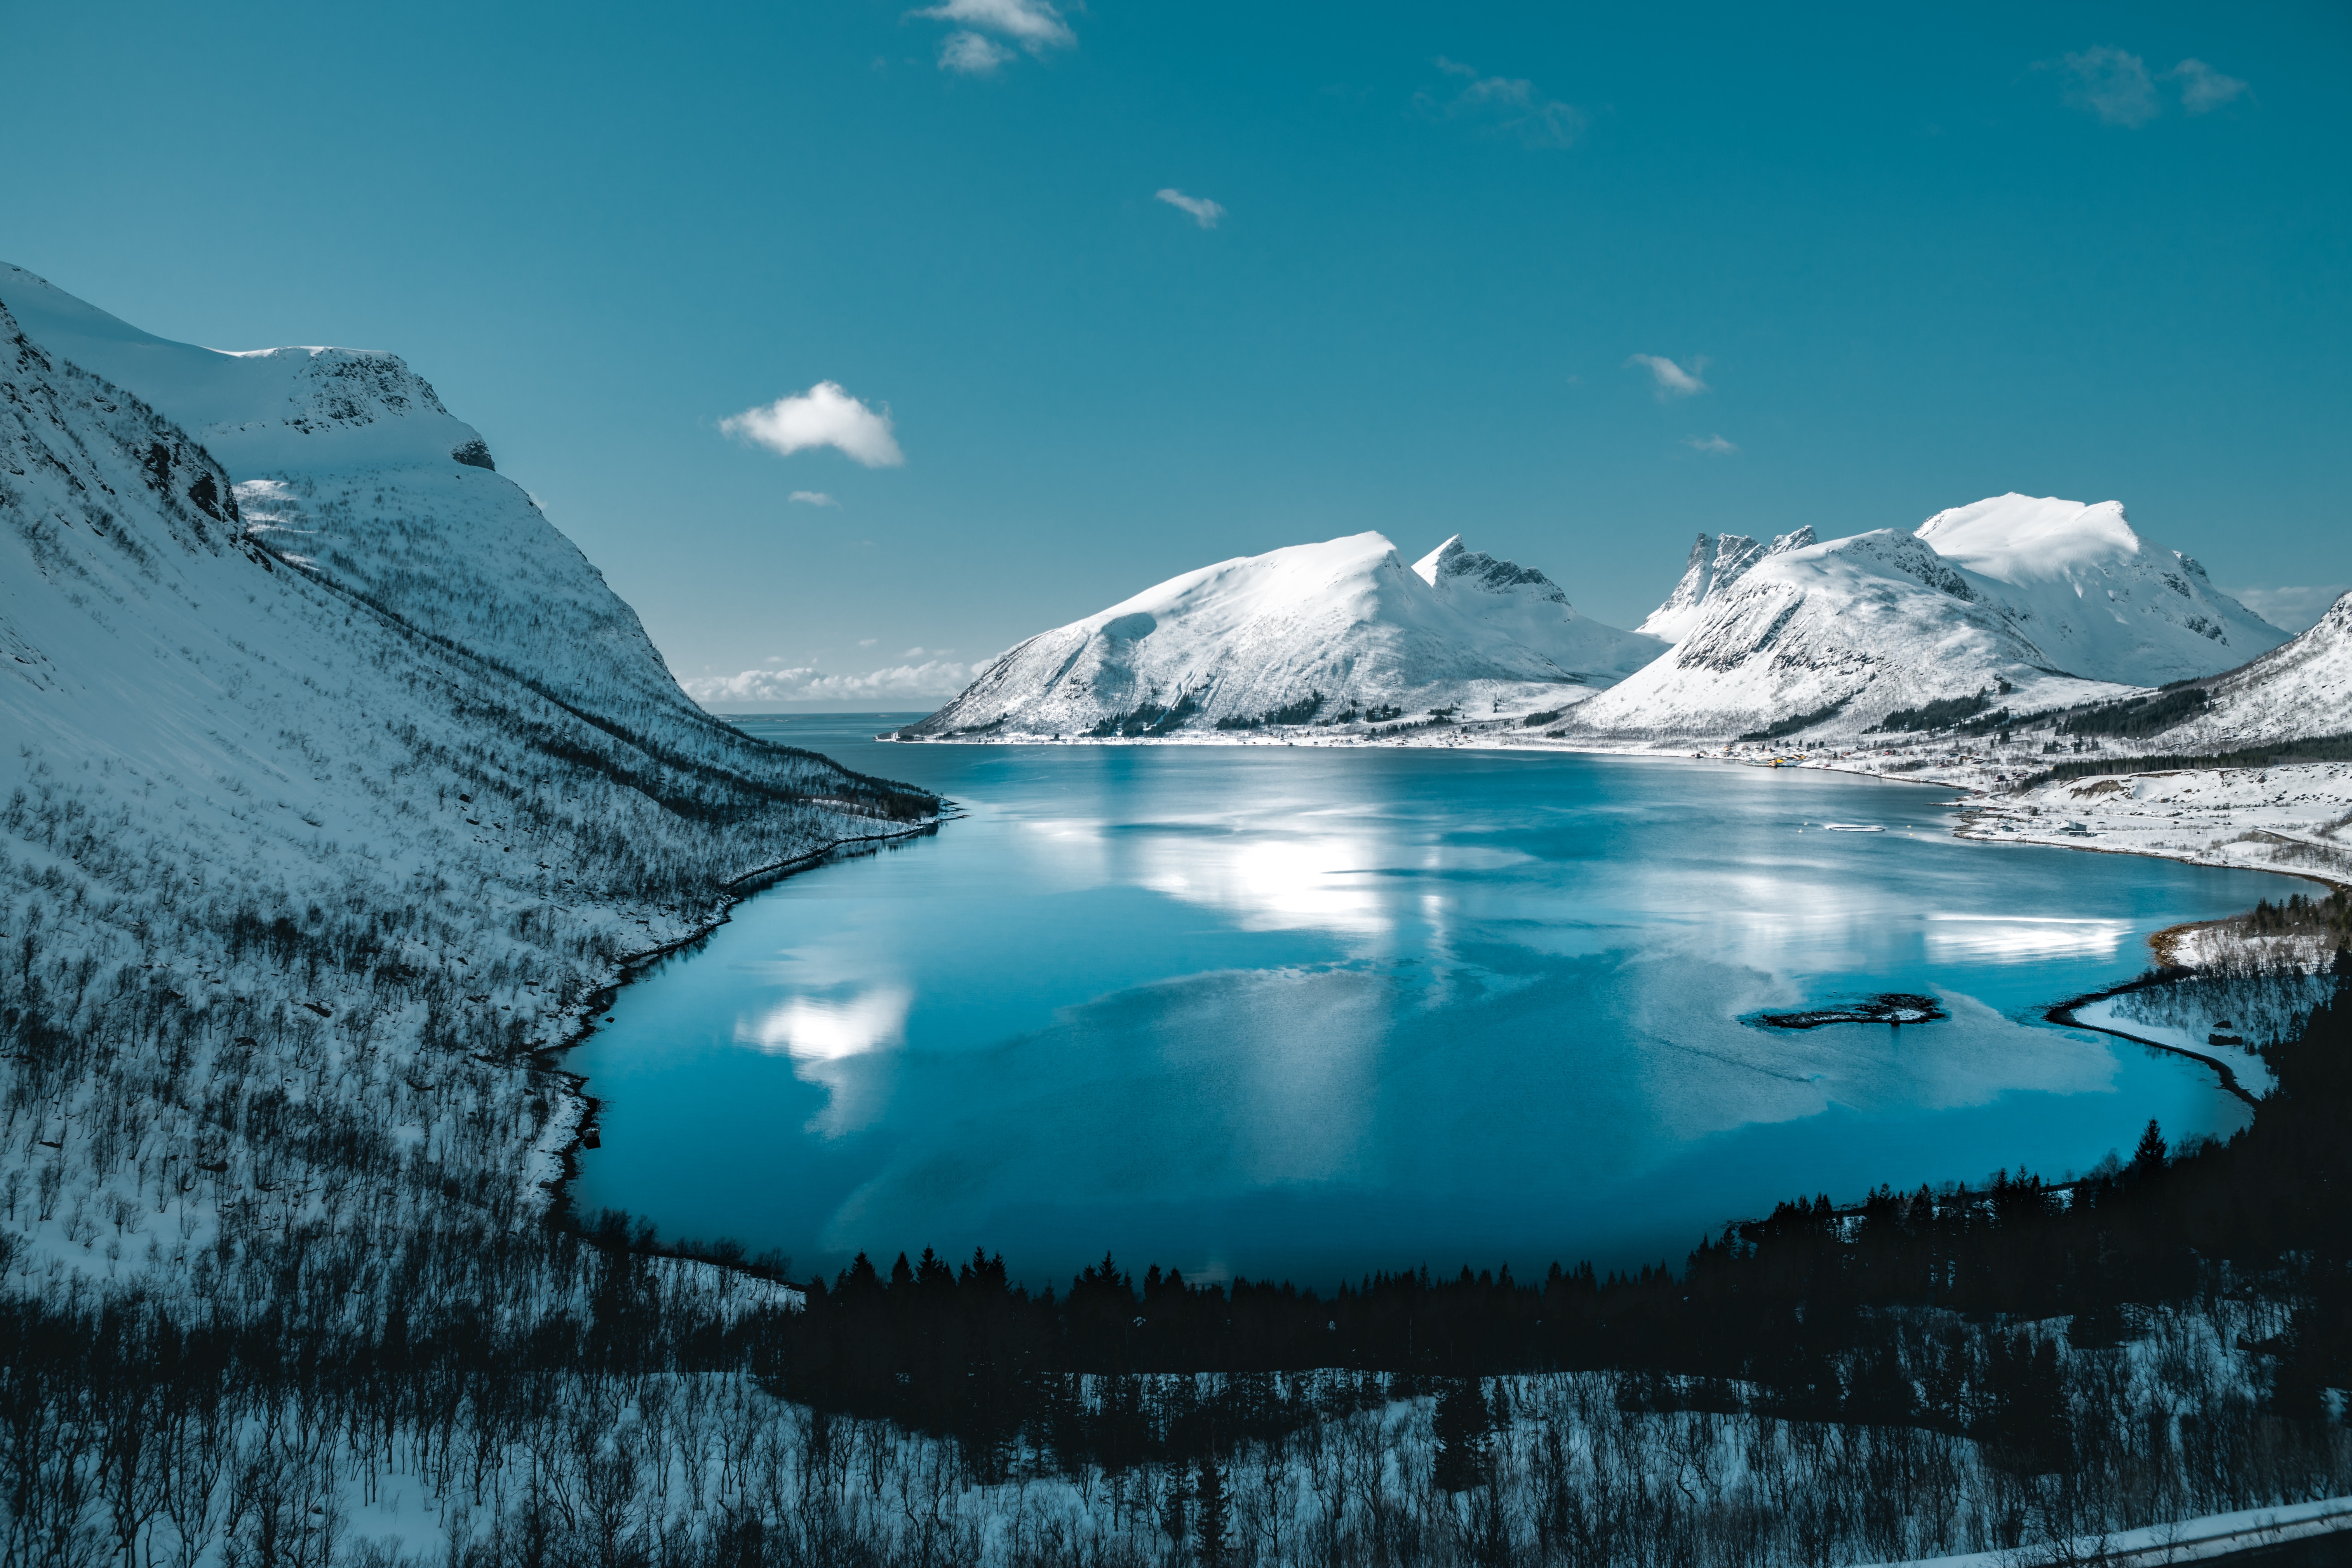 A lake surrounded by snow-covered mountains under a blue sky